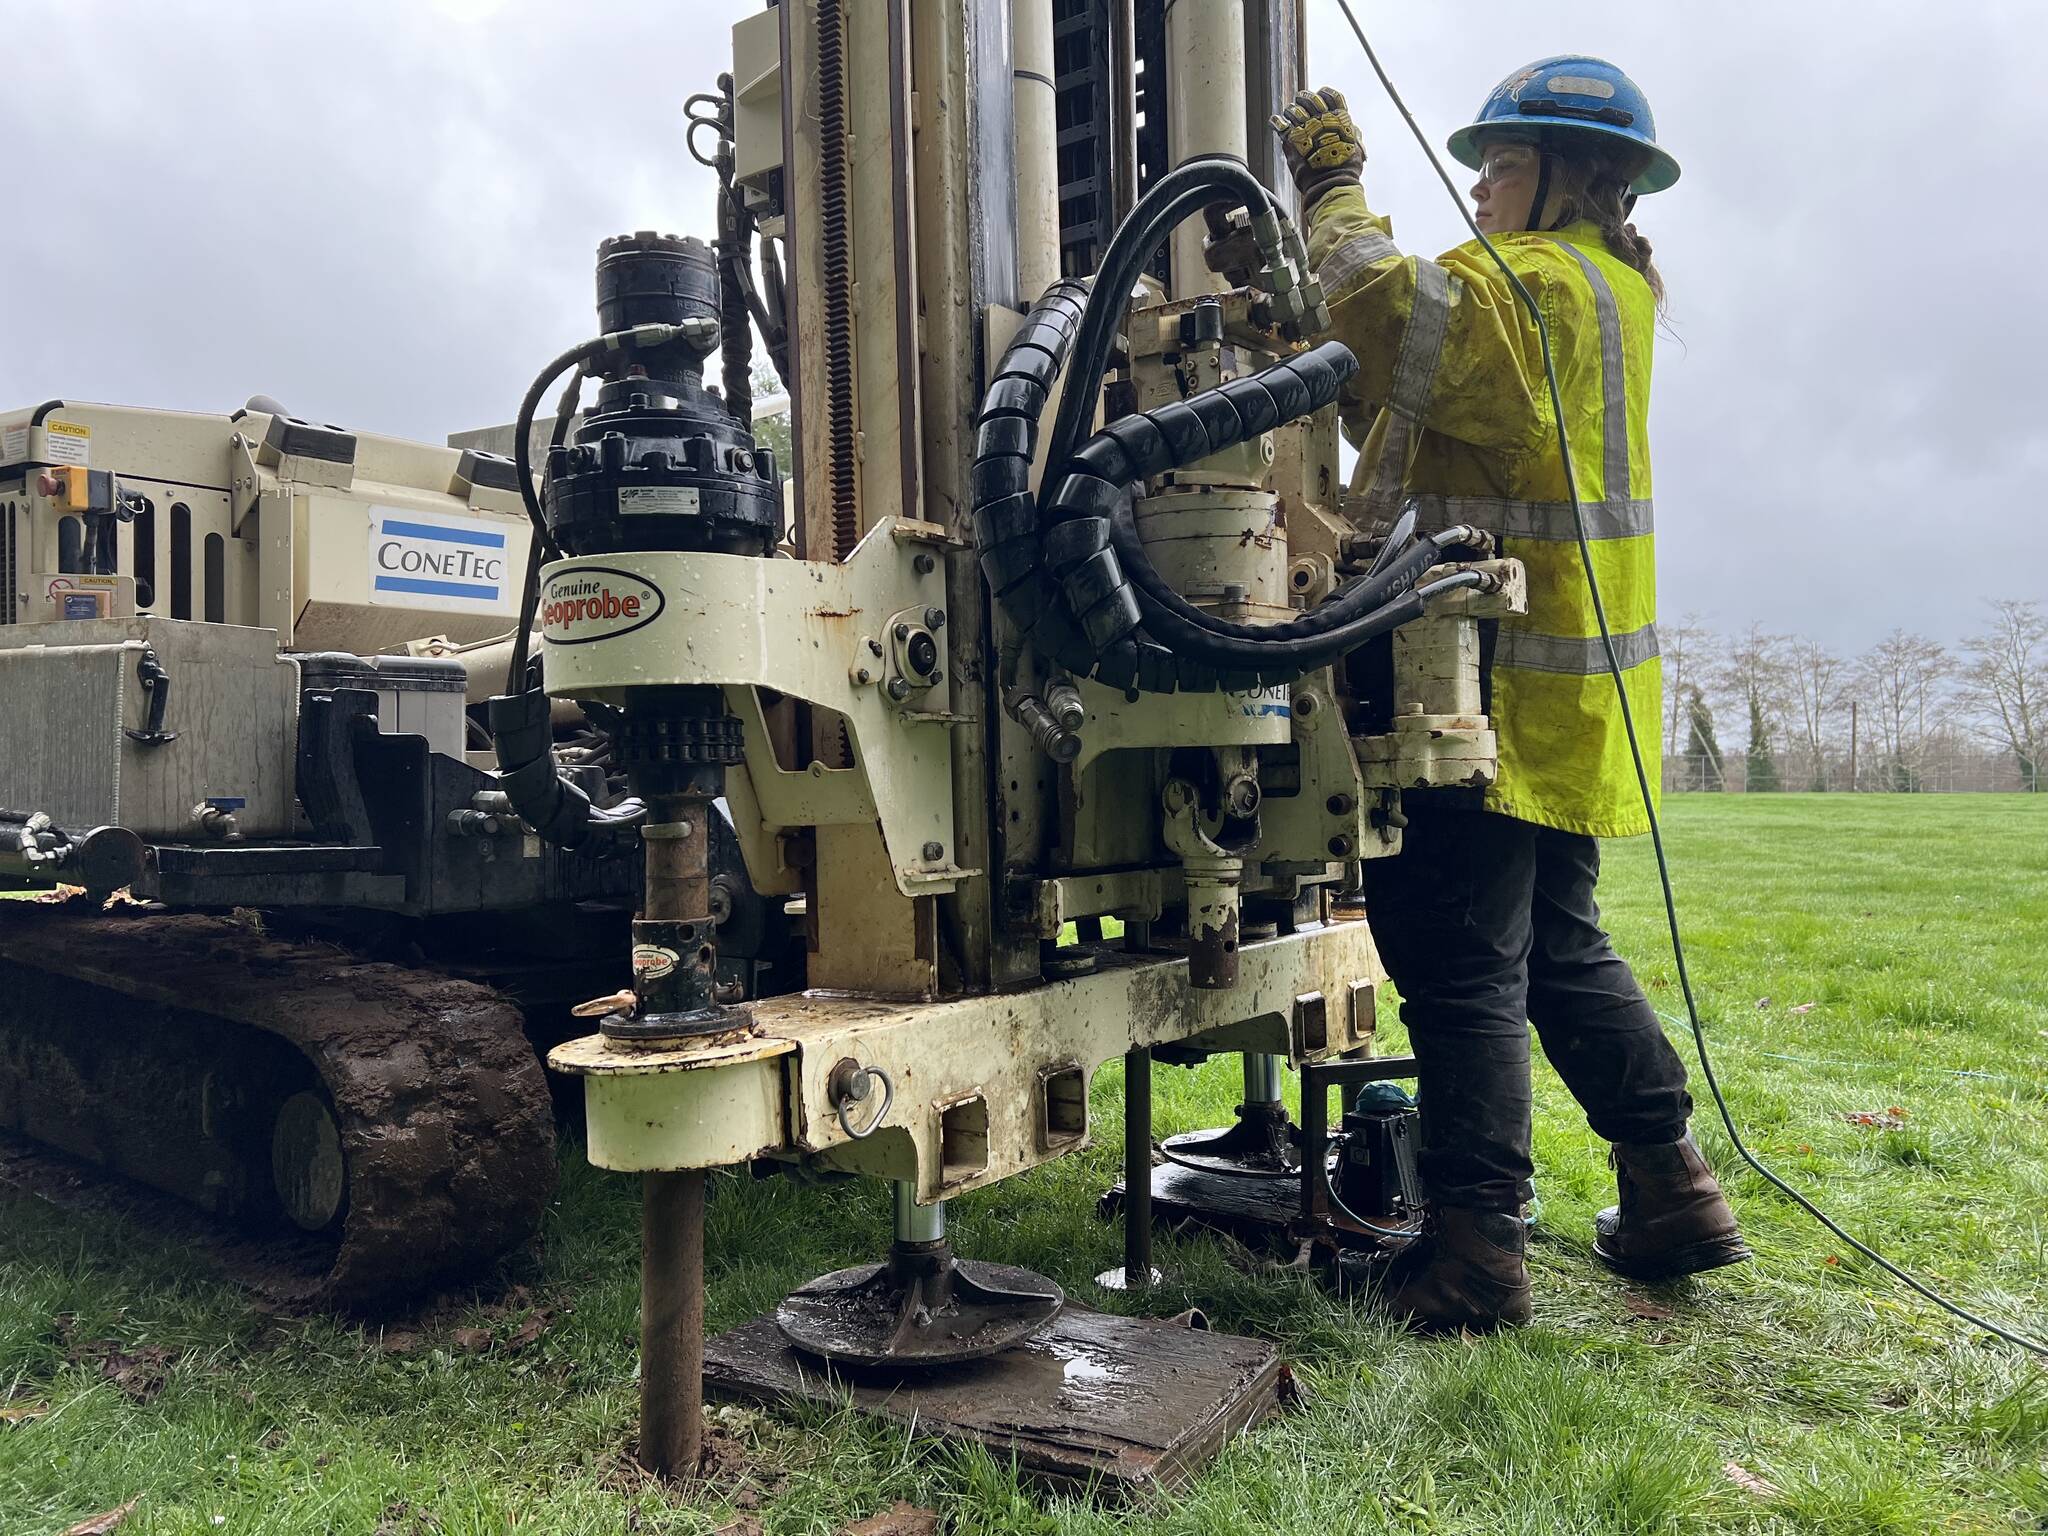 Emily Bayes, an assistant field geologist with ConeTec, the company hired to conduct soil stability assessments at the Hoquiam School District, operates a drilling machine at the Hoquiam High School baseball field on Feb. 21. (Clayton Franke / The Daily World)